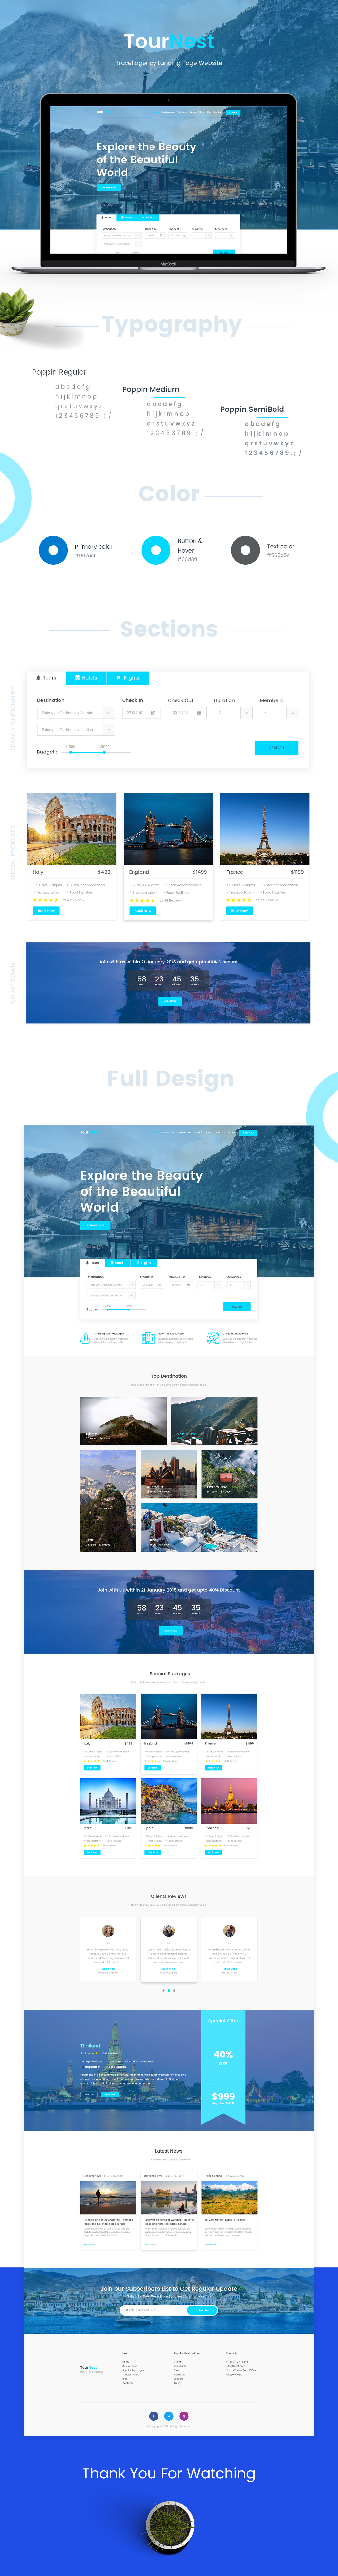 tour agency website travel agency Website tourism website free template down.oad